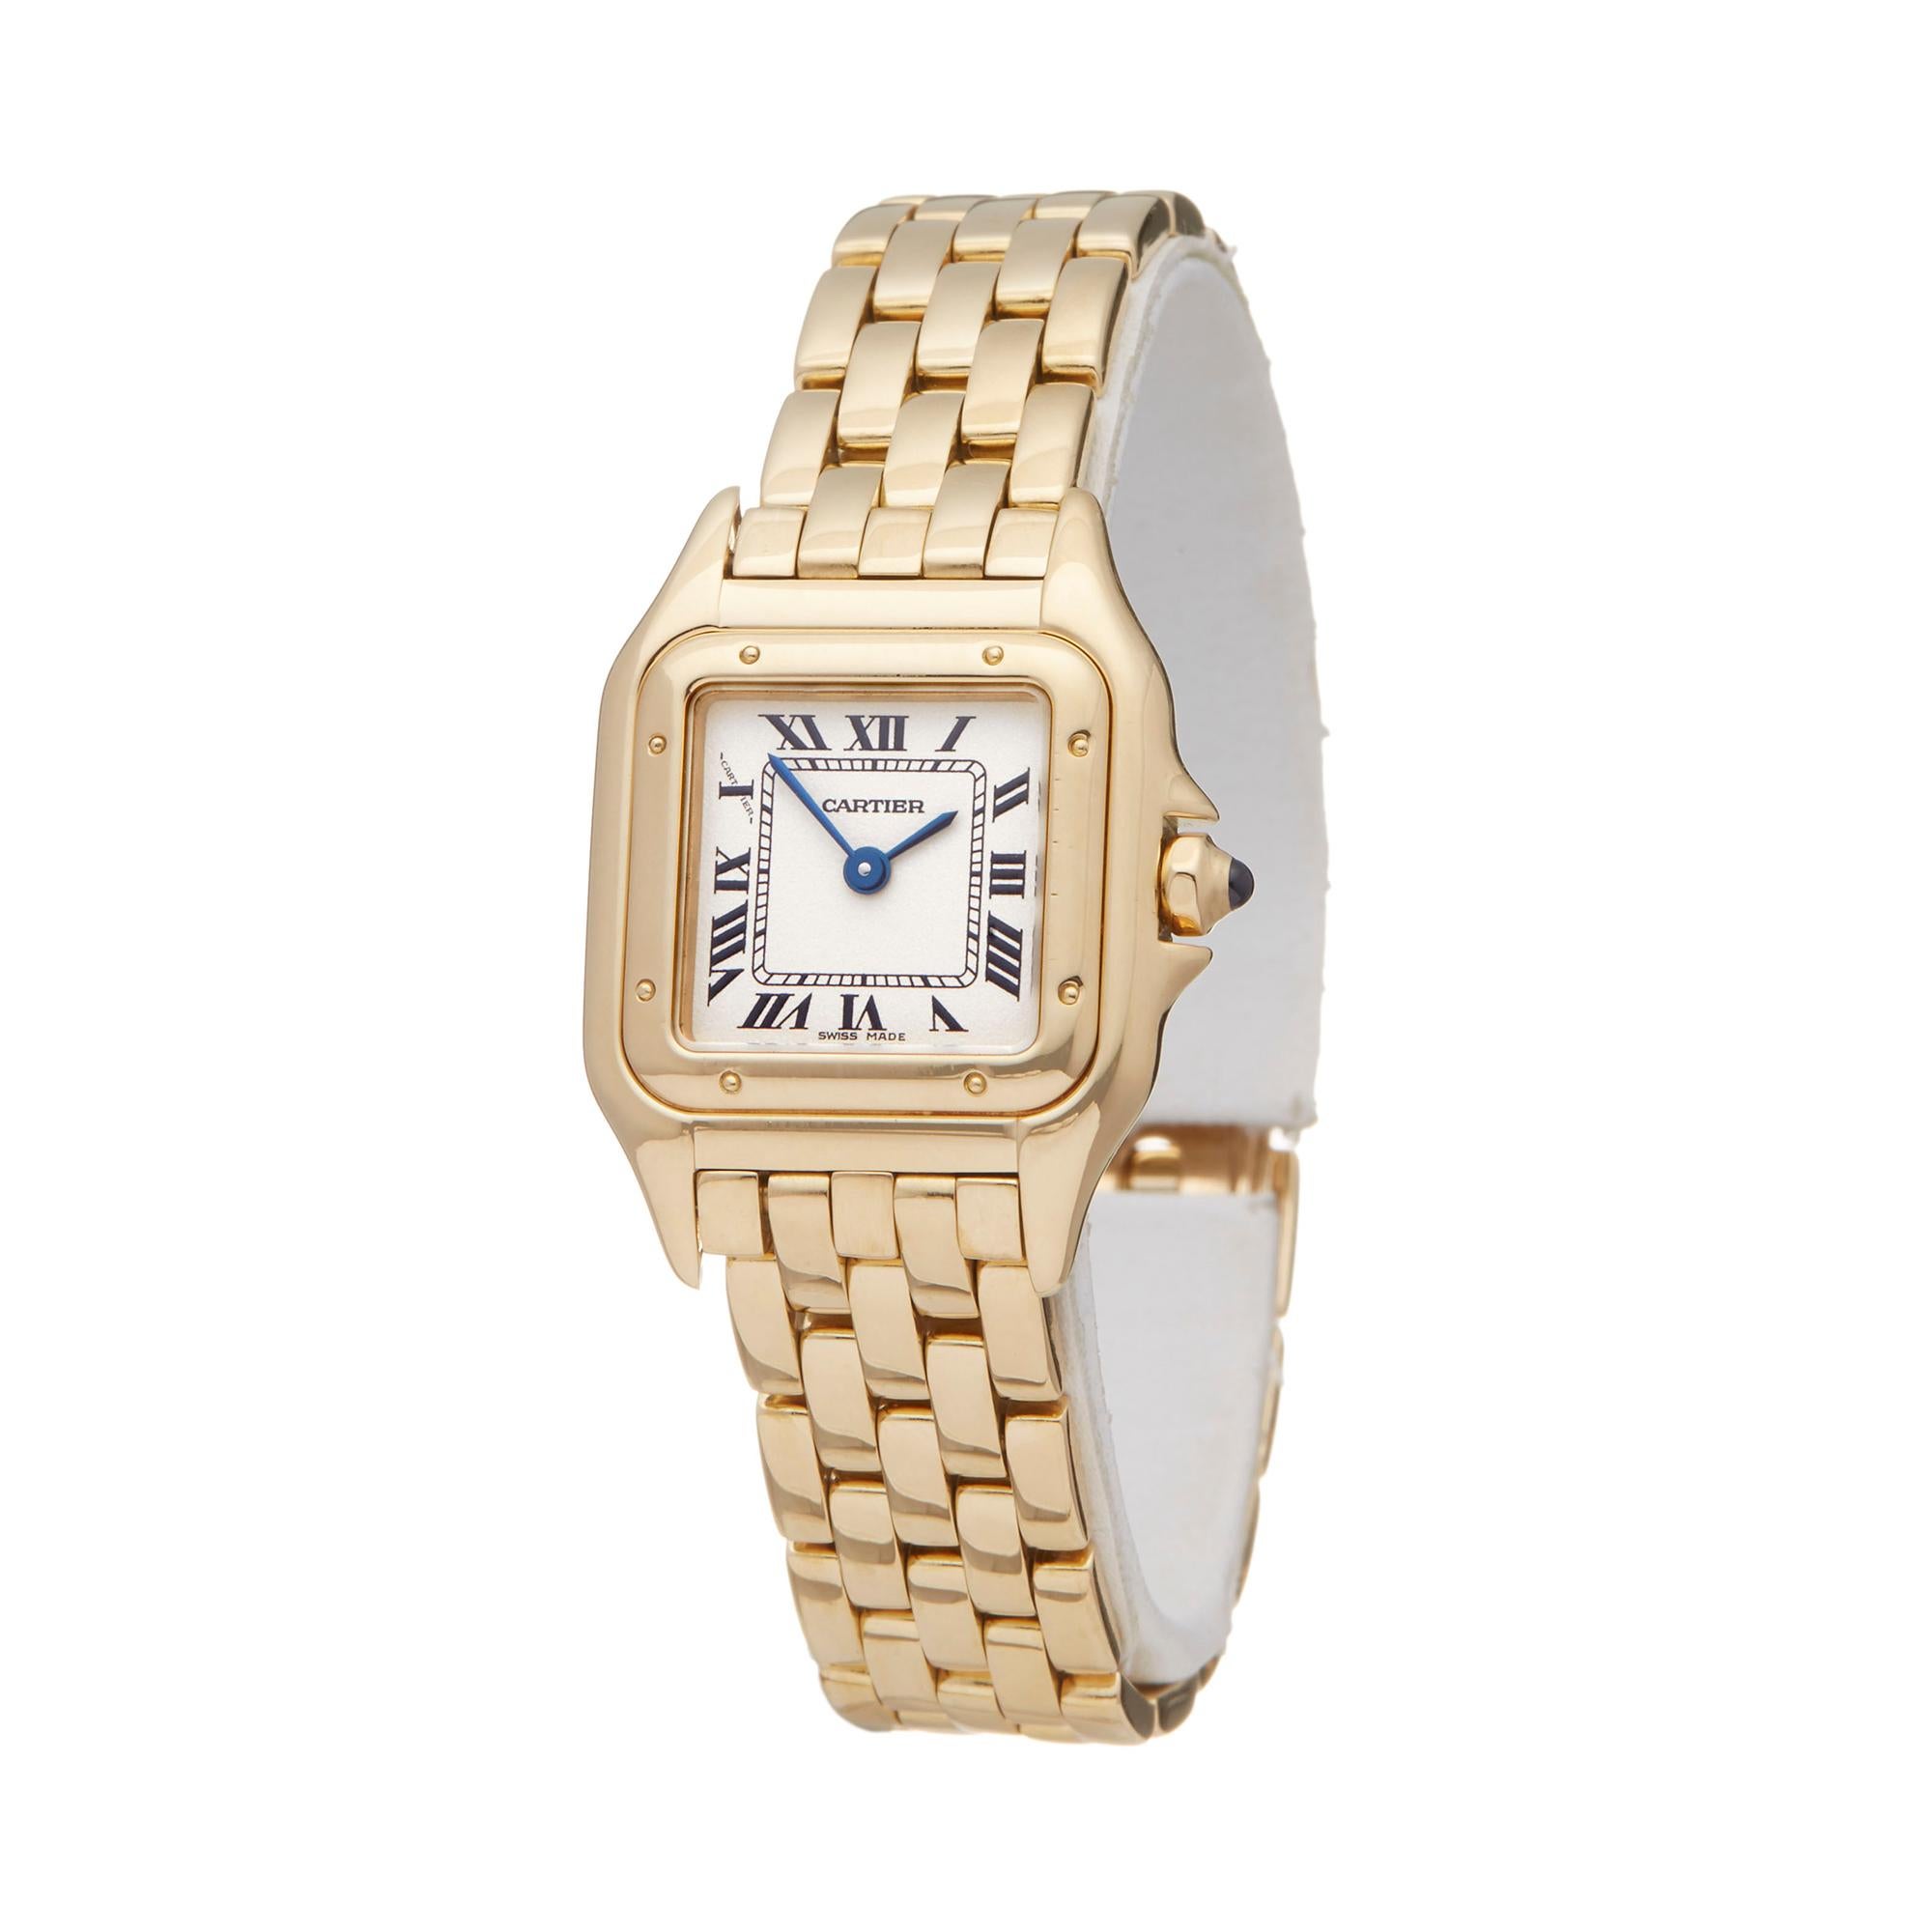 Reference: W6098
Manufacturer: Cartier
Model: Panthère de Cartier
Model Reference: W25022B9 or 1070
Age: 30th May 1989
Gender: Women's
Box and Papers: Box, Manuals and Guarantee
Dial: White Roman
Glass: Sapphire Crystal
Movement: Quartz
Water